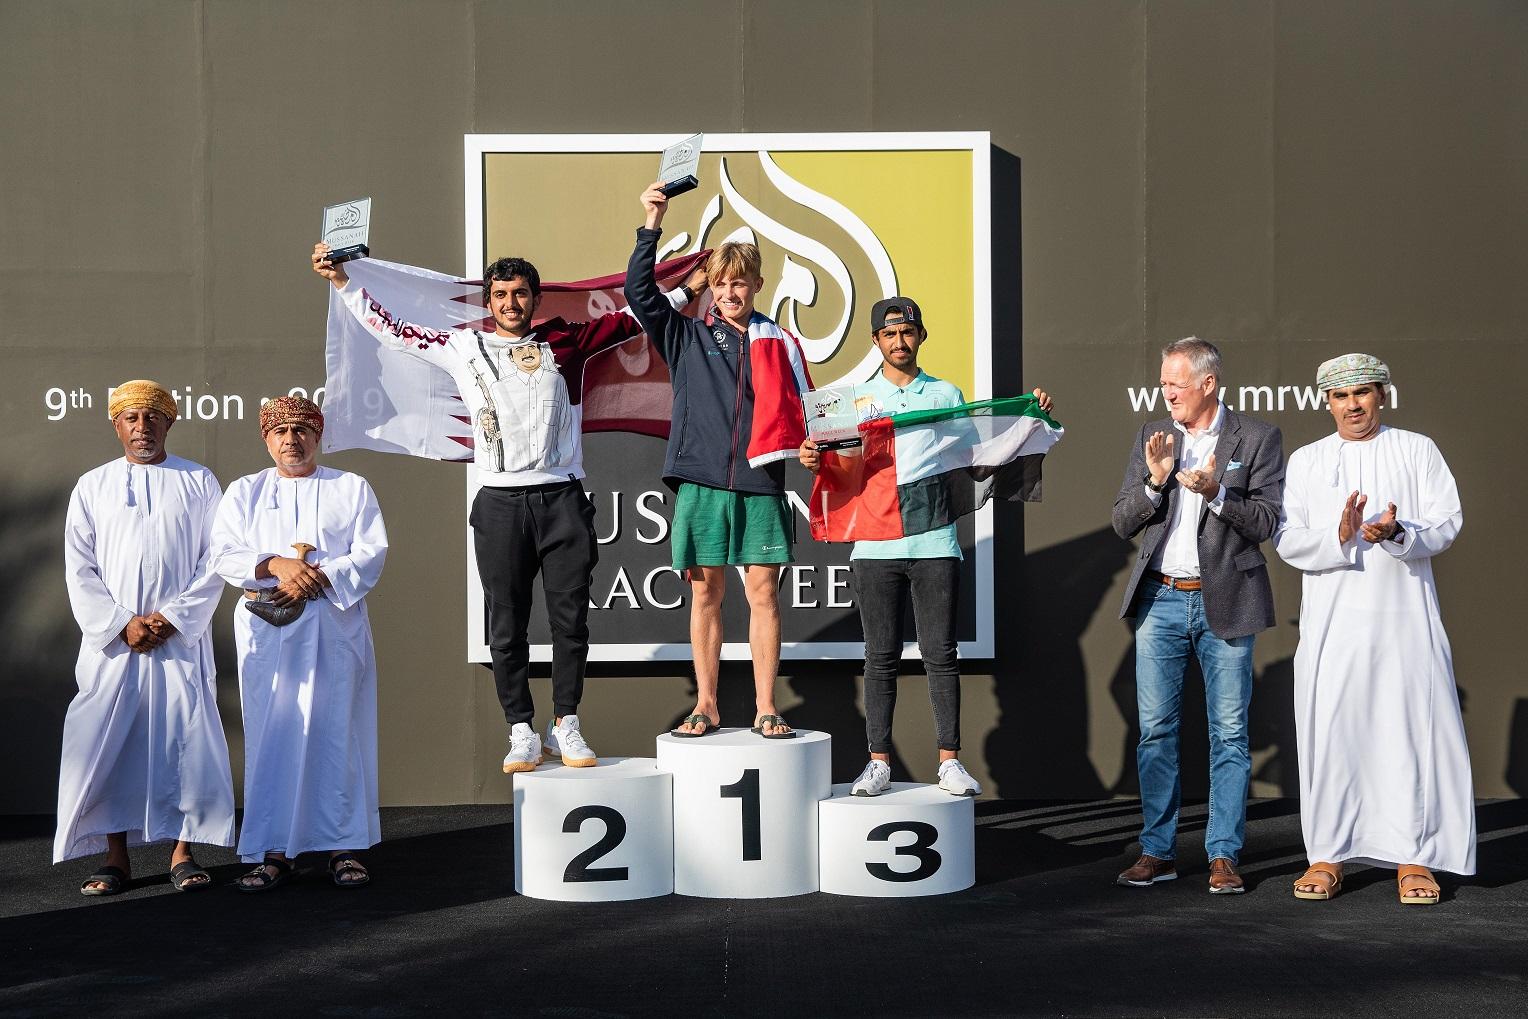 The conclusion of the ninth Mussanah Race Week regatta in Oman